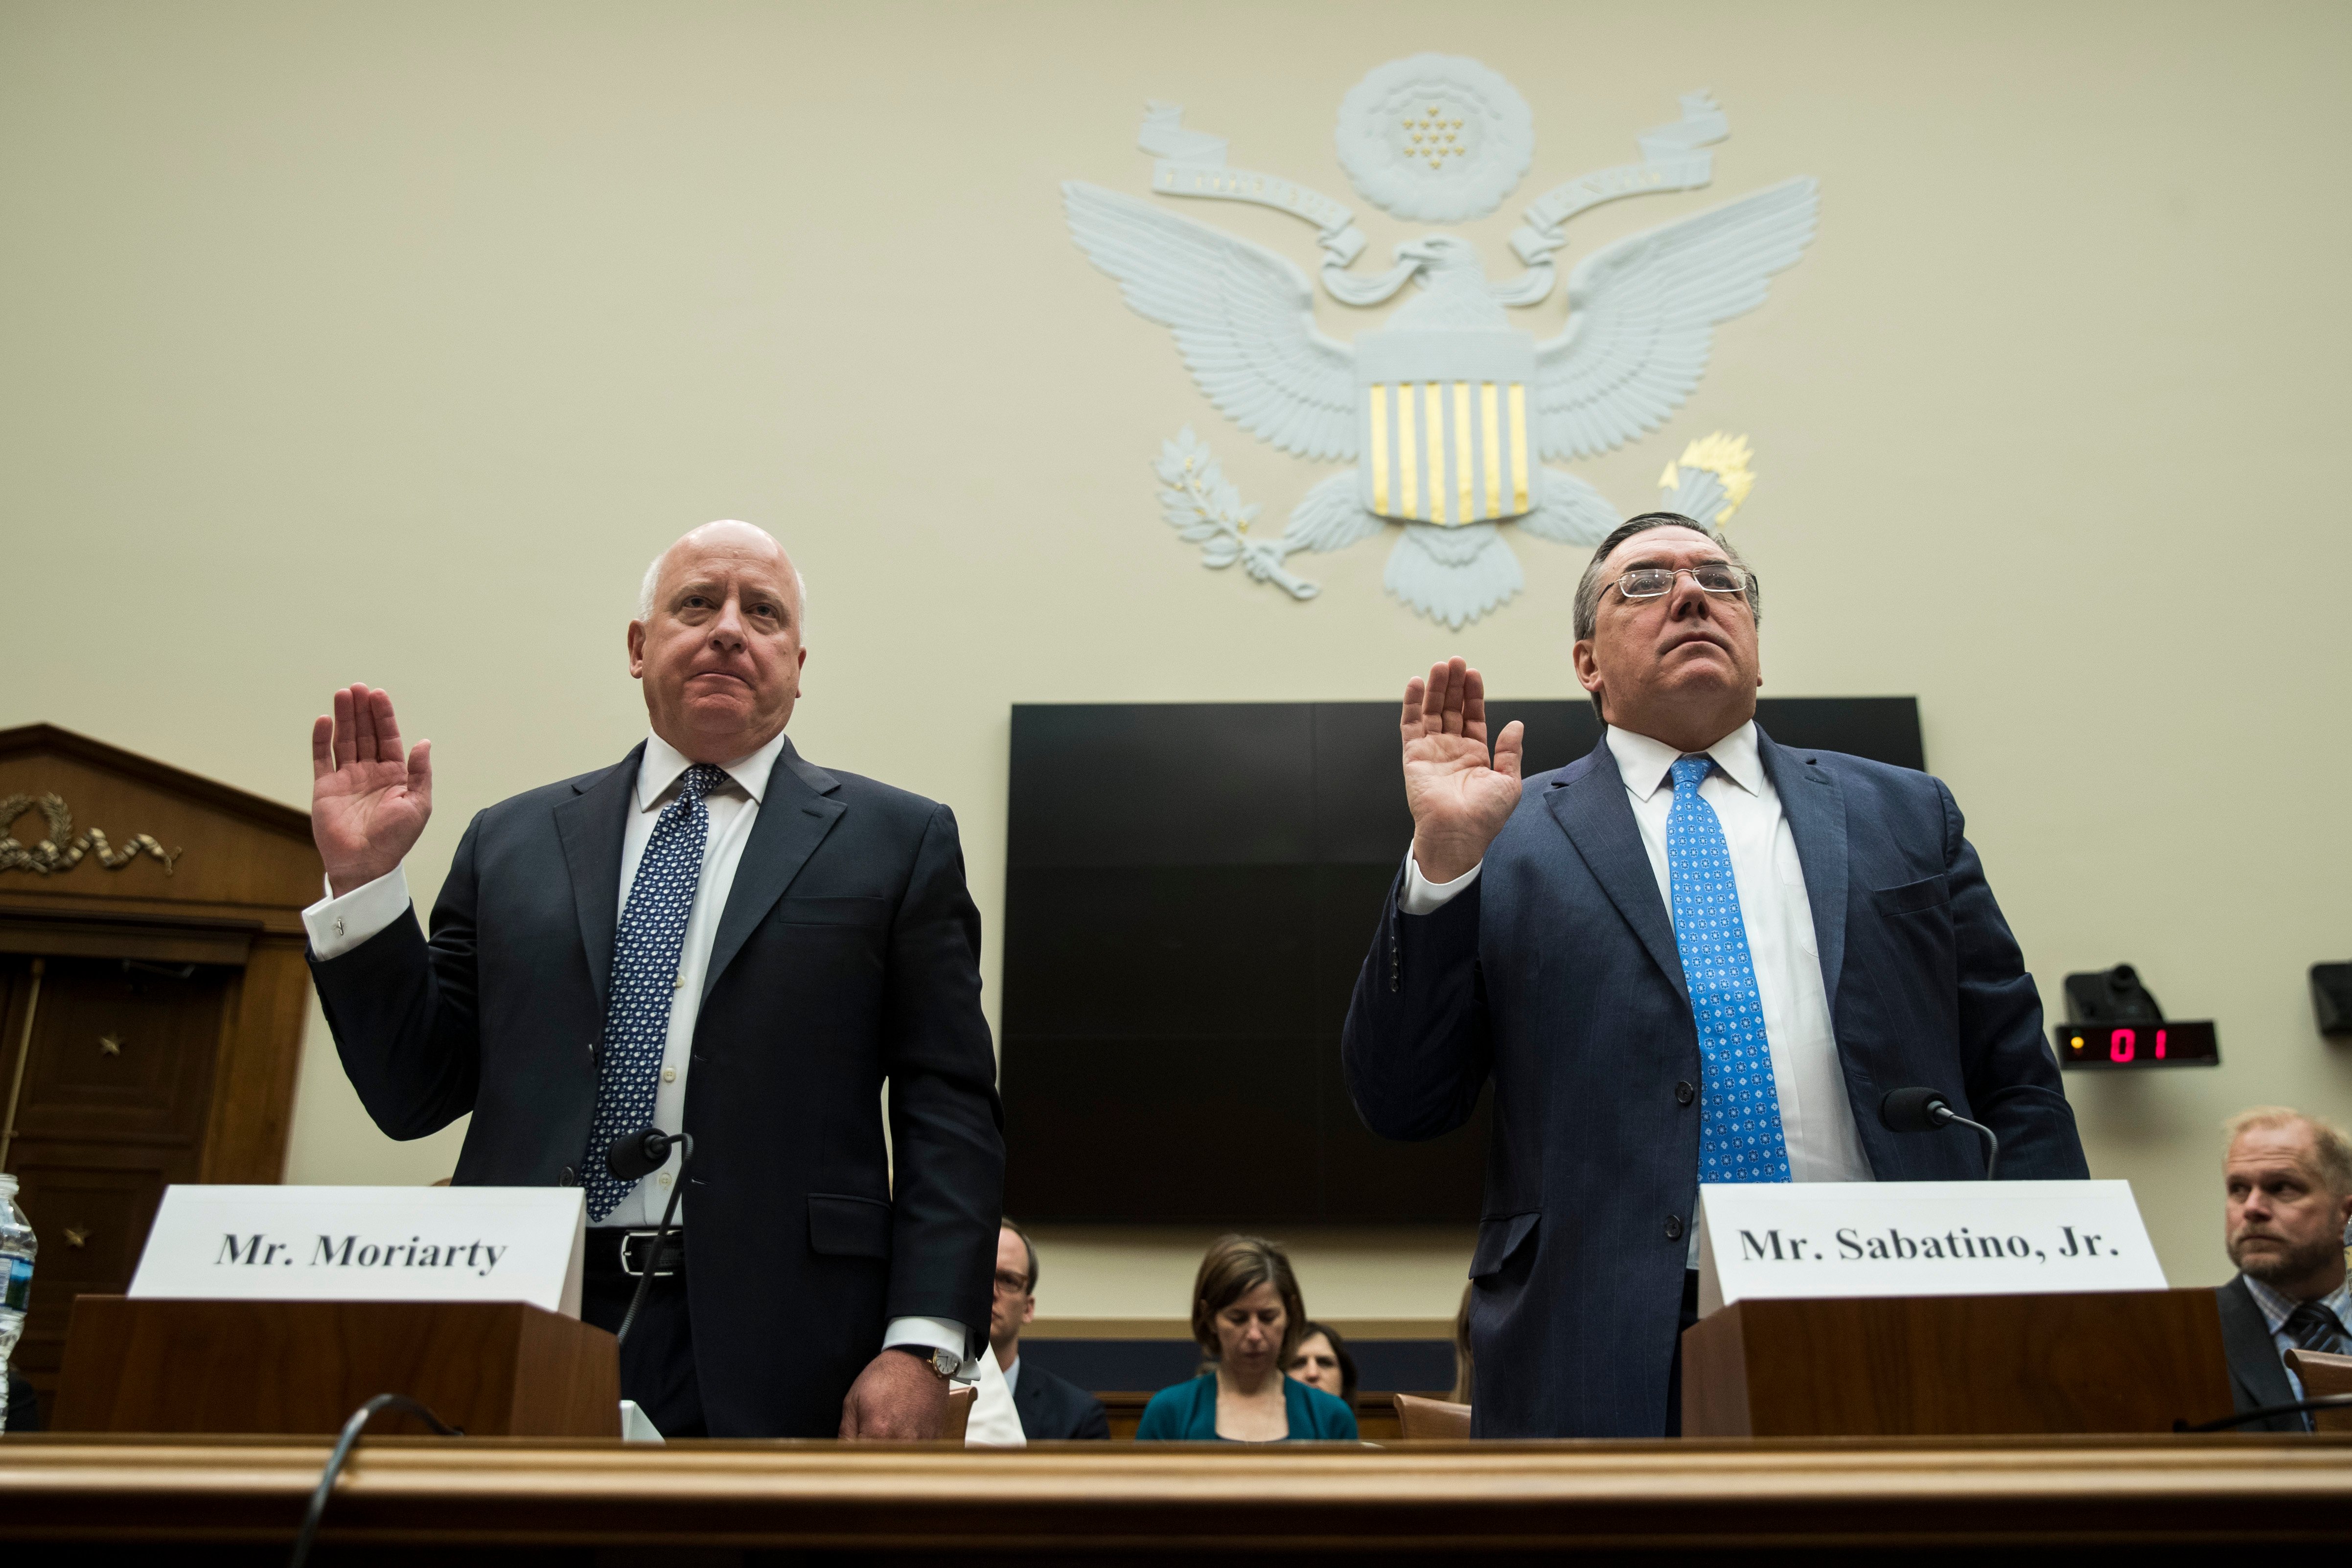 (L to R) Thomas Moriarty, executive Vice President and general counsel at CVS Health, and Thomas Sabatino, executive Vice President and general counsel at Aetna, are sworn-in during a House Judiciary Subcommittee hearing on the proposed merger of CVS Health and Aetna, on Capitol Hill, February 27, 2018 in Washington, DC. Drew Angerer/Getty Images